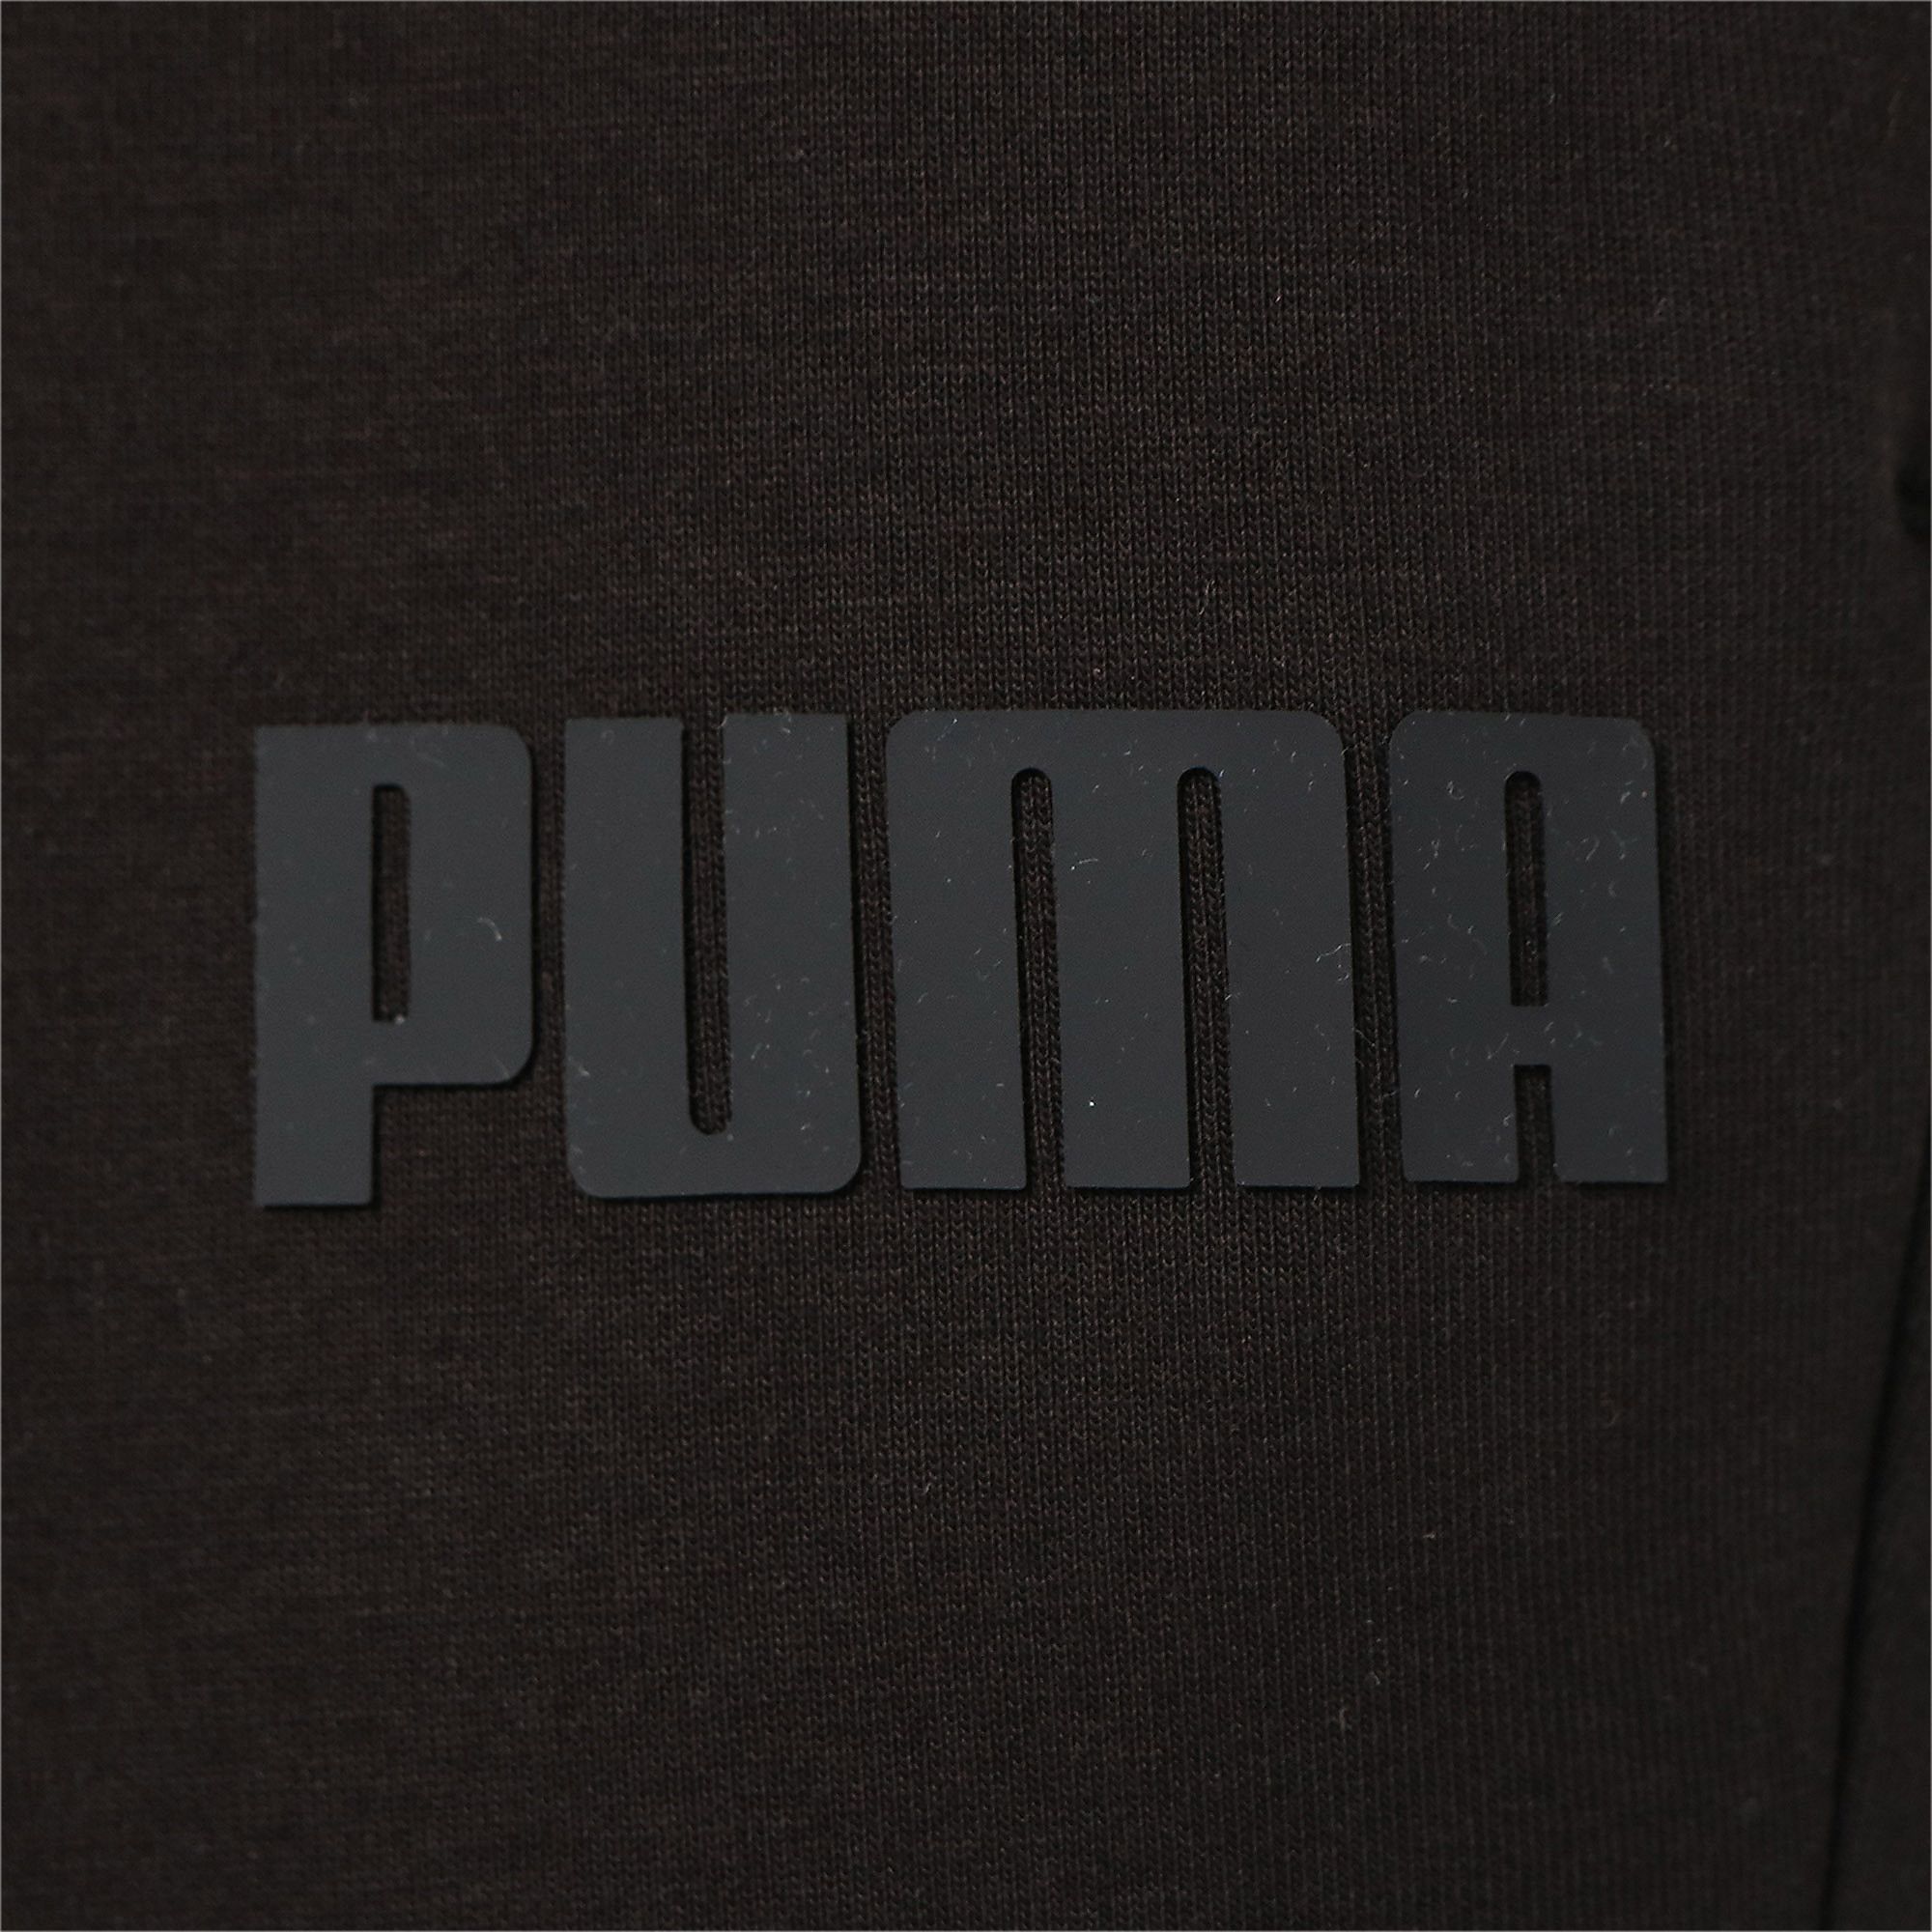  Perfect for relaxing at home or heading out, the SPACER Pants will keep you dry and fresh, thanks to their moisture-wicking material. DETAILS Regular fit. Comfortable style by PUMA. PUMA branding details. Signature PUMA design elements.